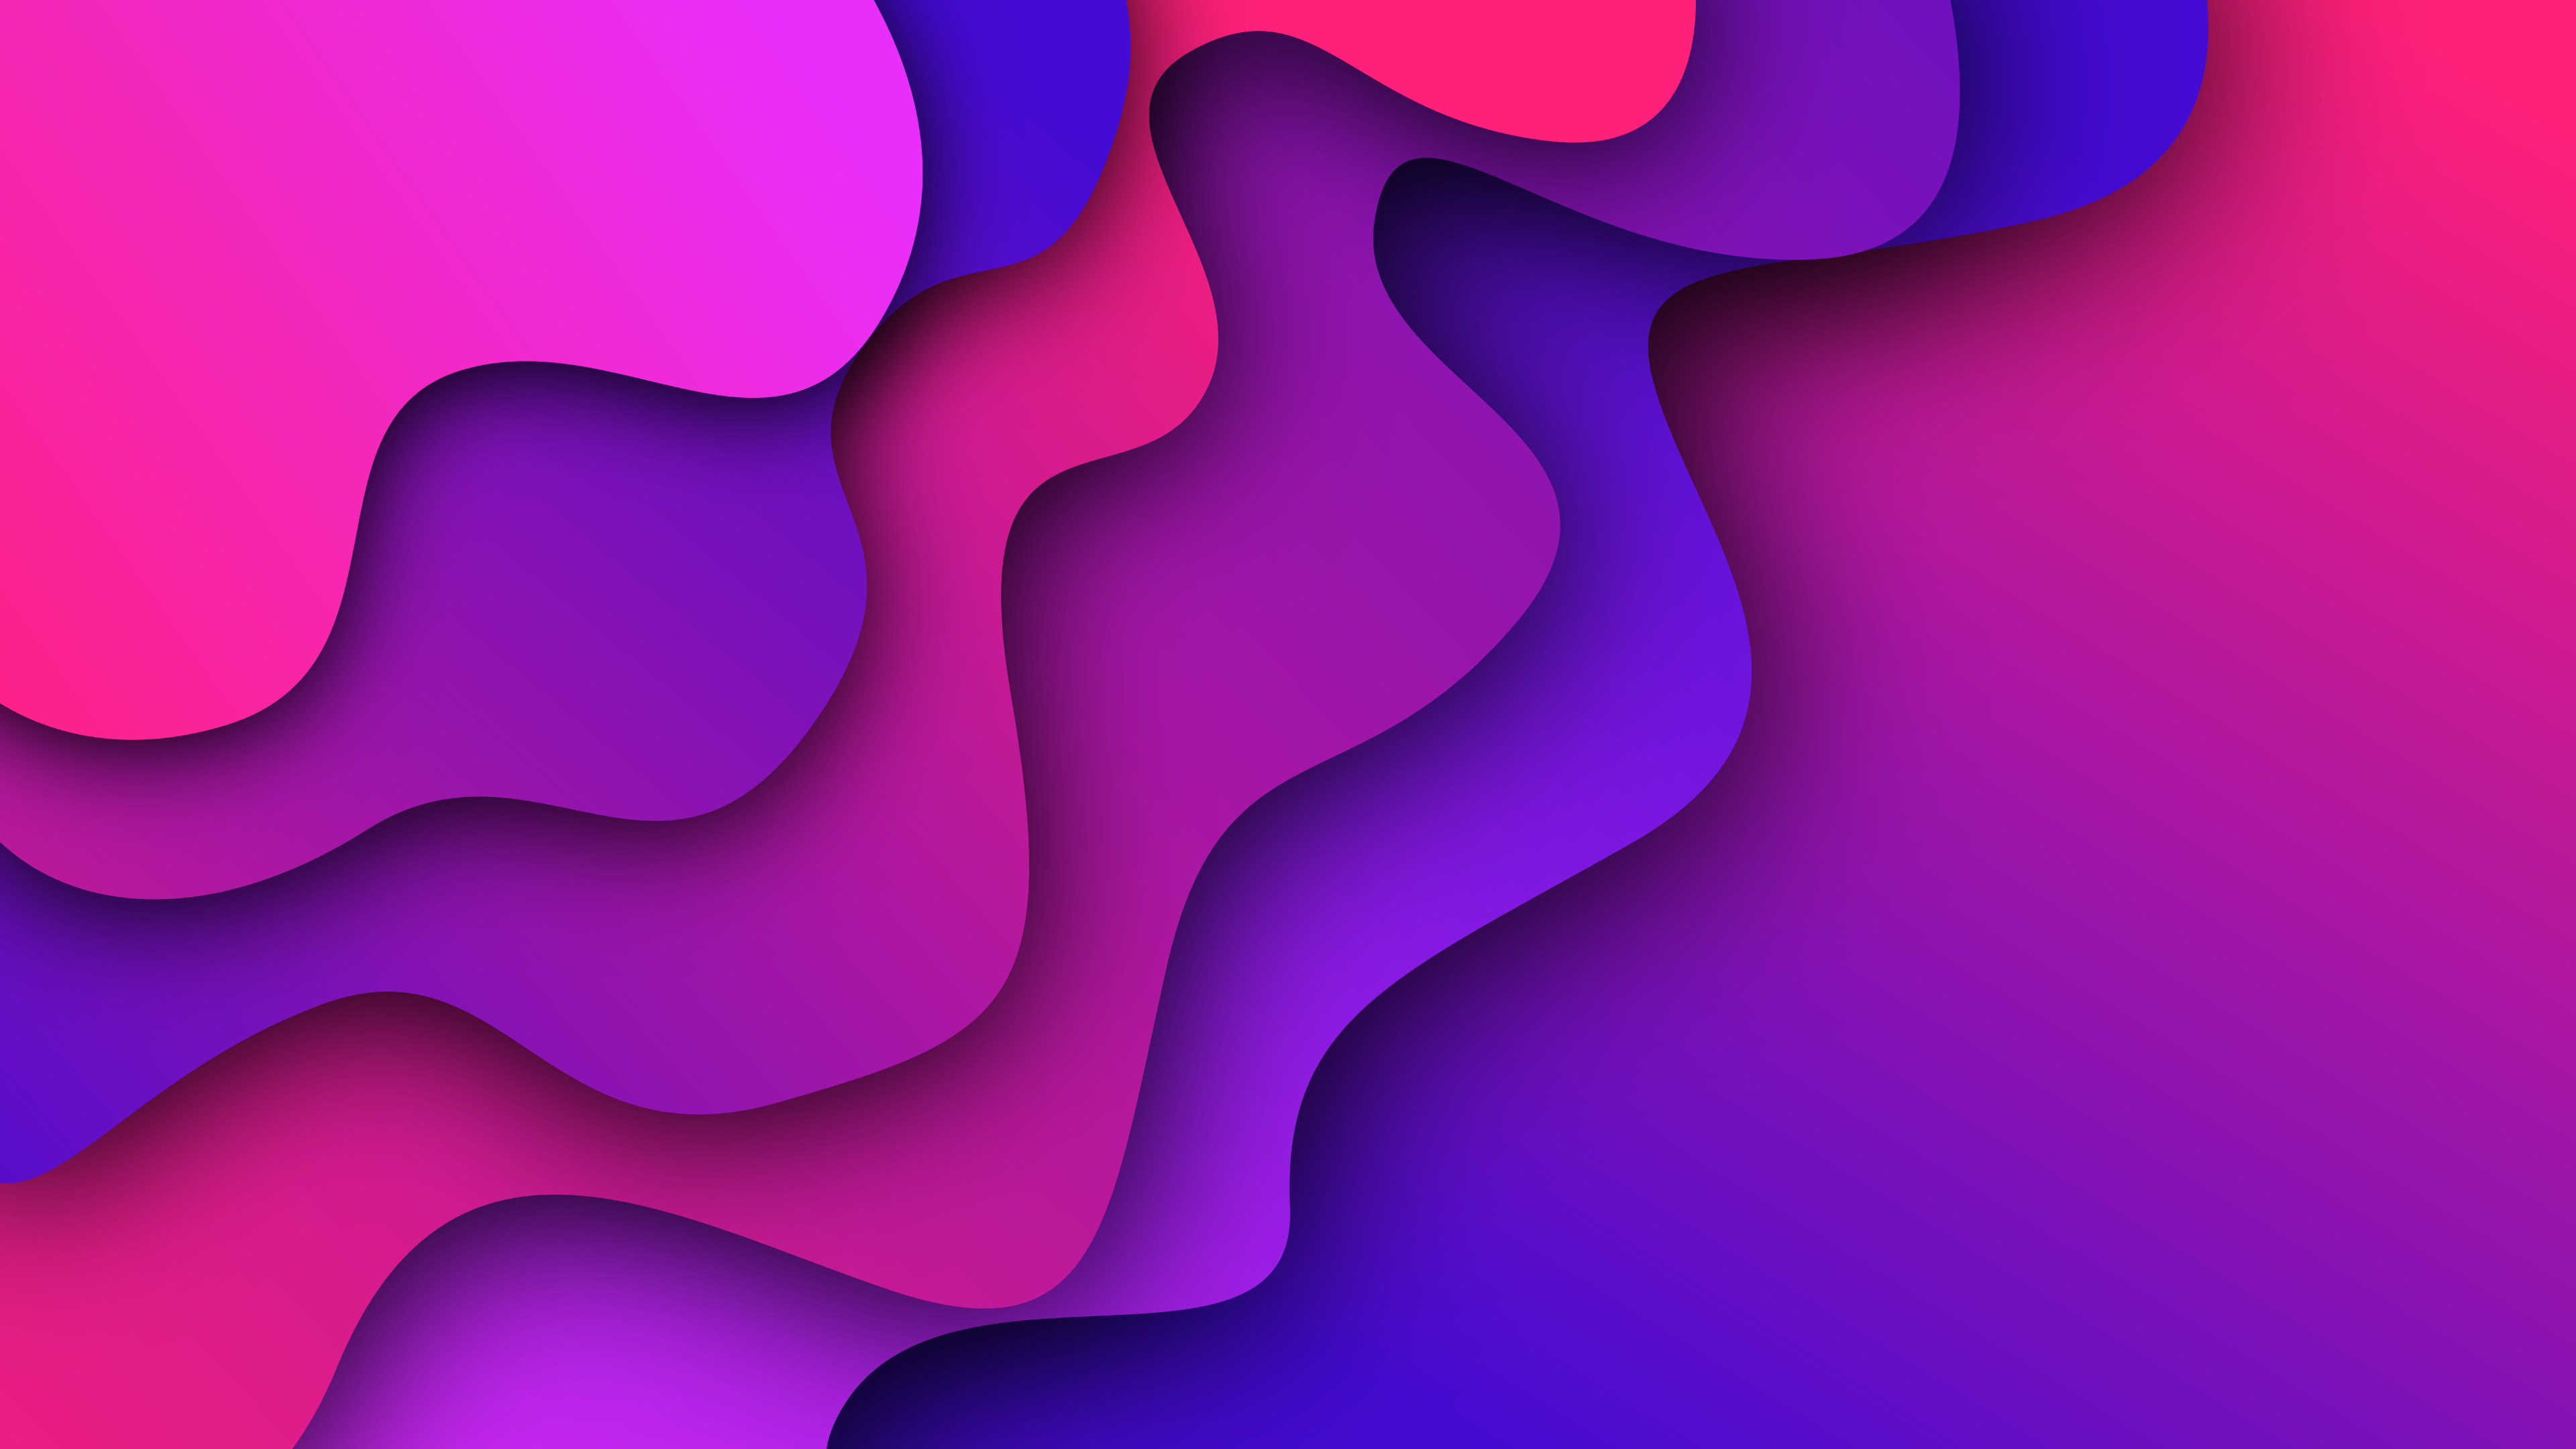 4K Neon Goo made with Inkscape